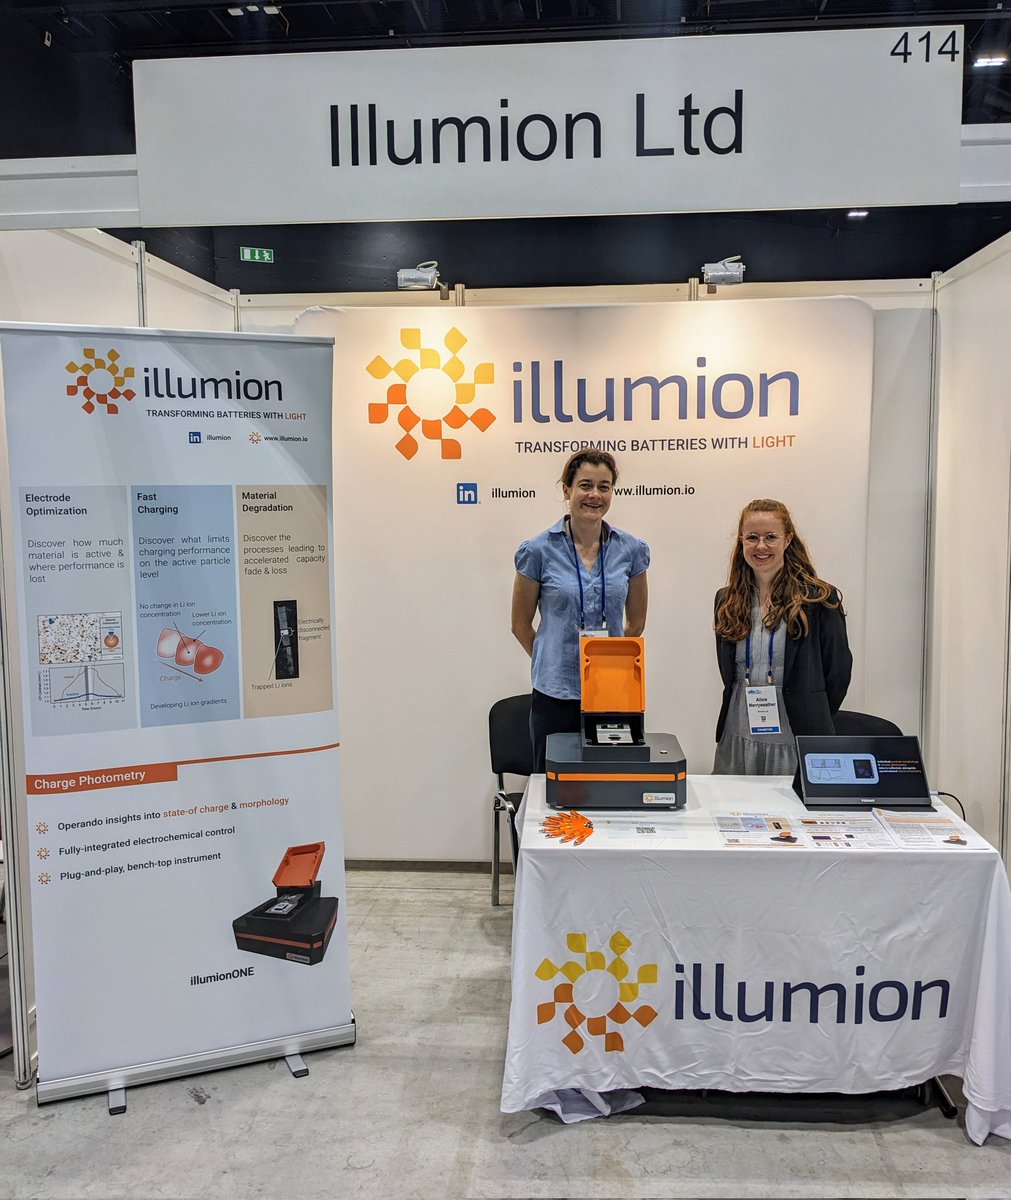 Excited to be spreading the word about #illumion at #AABCEurope in Strasbourg! If you're here, come and say hello at Booth 414, and find out some more about charge photometry! 🔋🔬 #battchat #batteryresearch